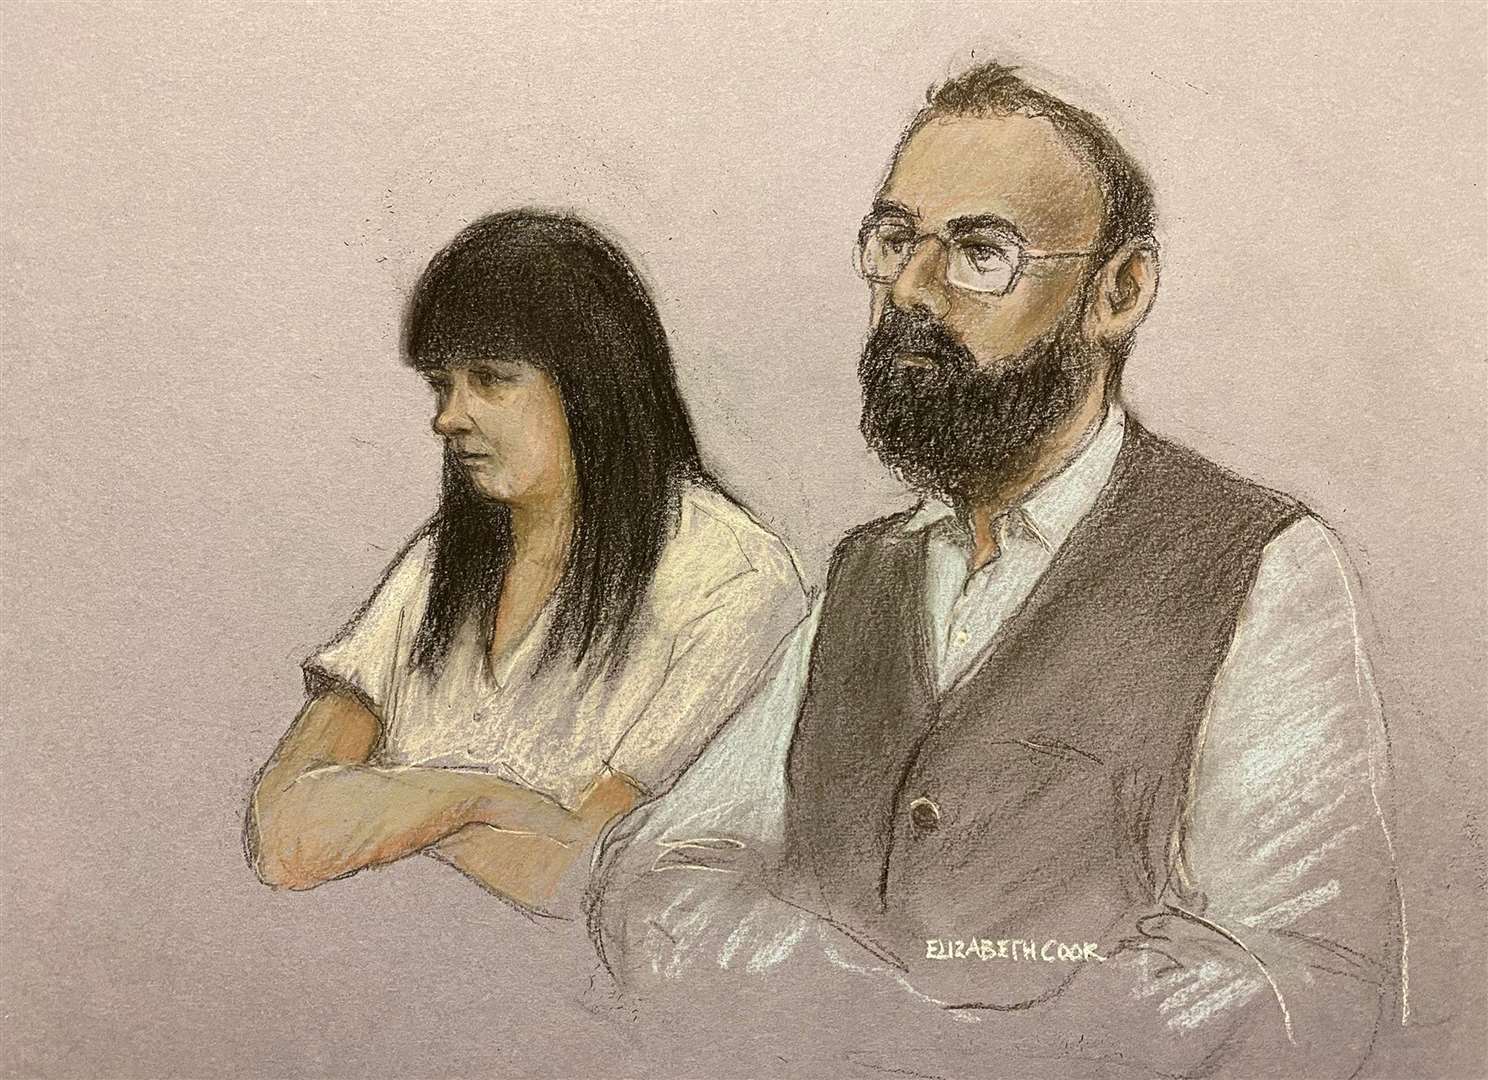 Gemma Barton and Craig Crouch ‘knew that one or both of them’ killed Jacob Crouch, prosecutors said (Elizabeth Cook/PA)